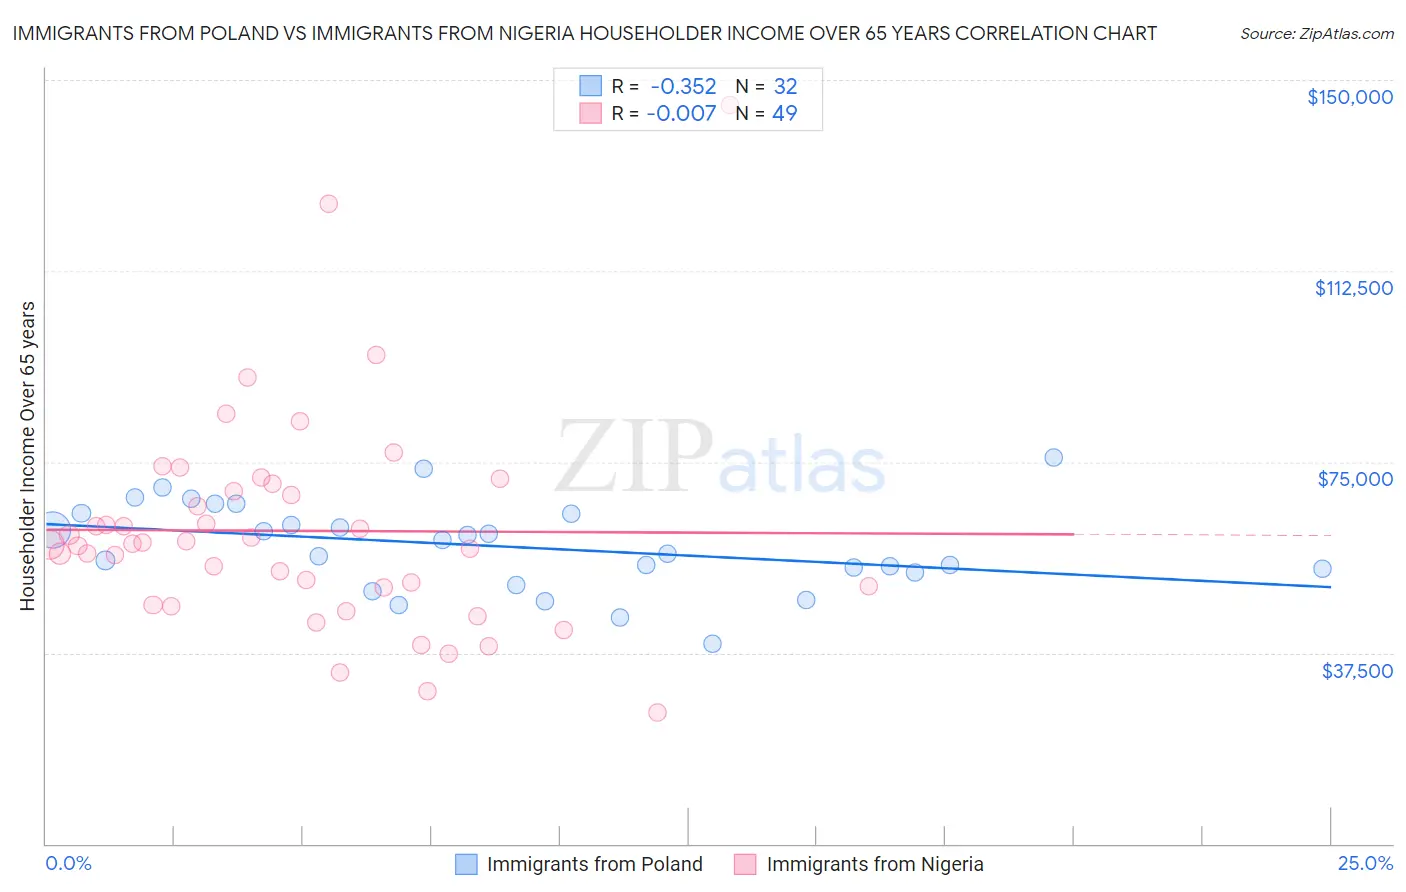 Immigrants from Poland vs Immigrants from Nigeria Householder Income Over 65 years